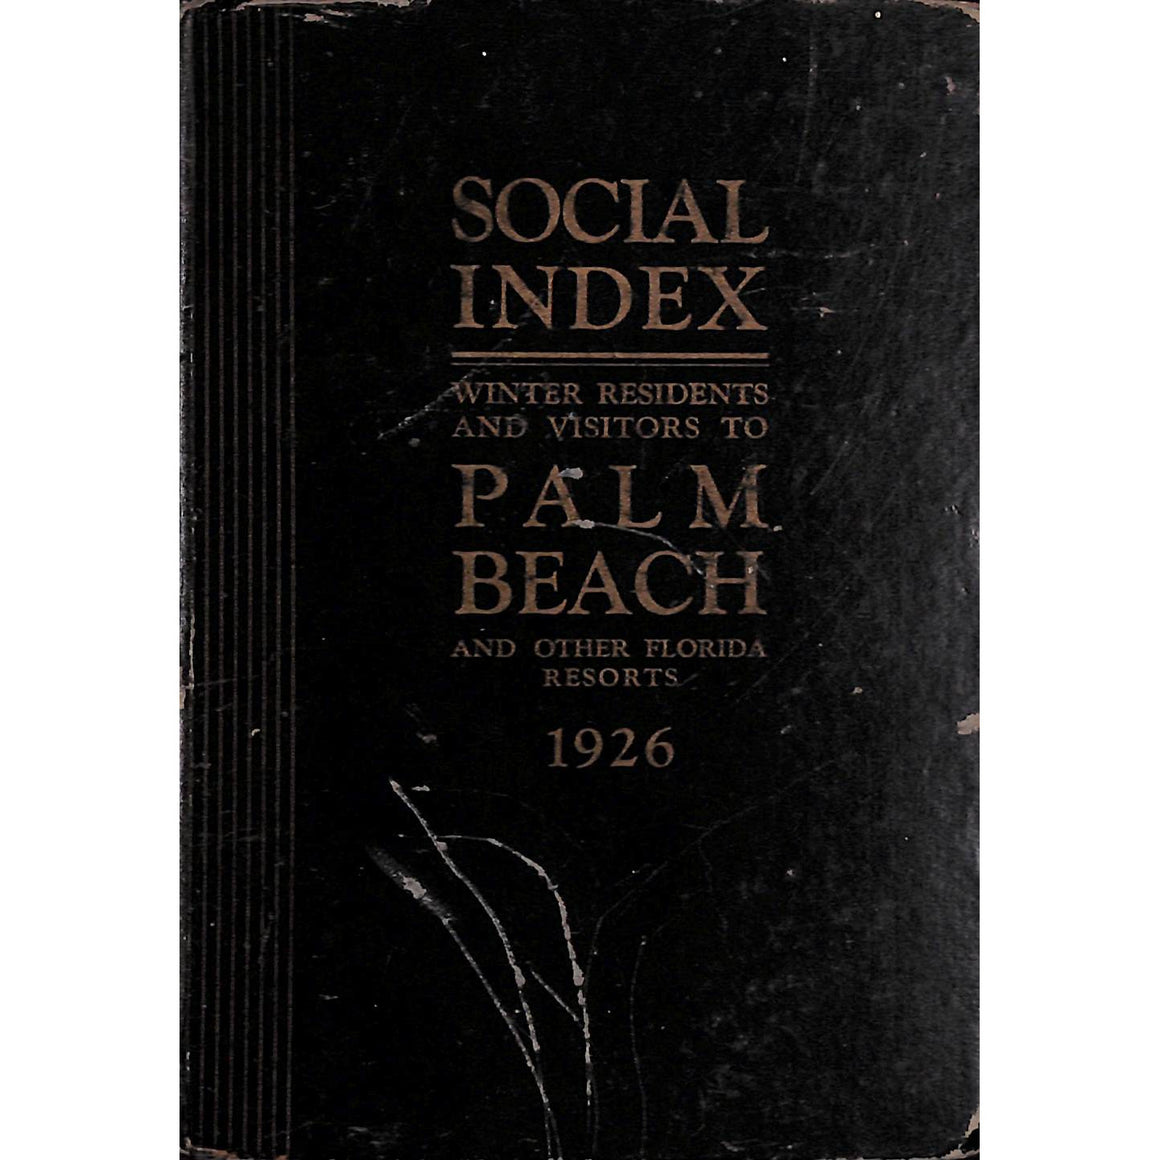 Social Index Winter Residents And Visitors To Palm Beach And Other Florida Resorts 1926